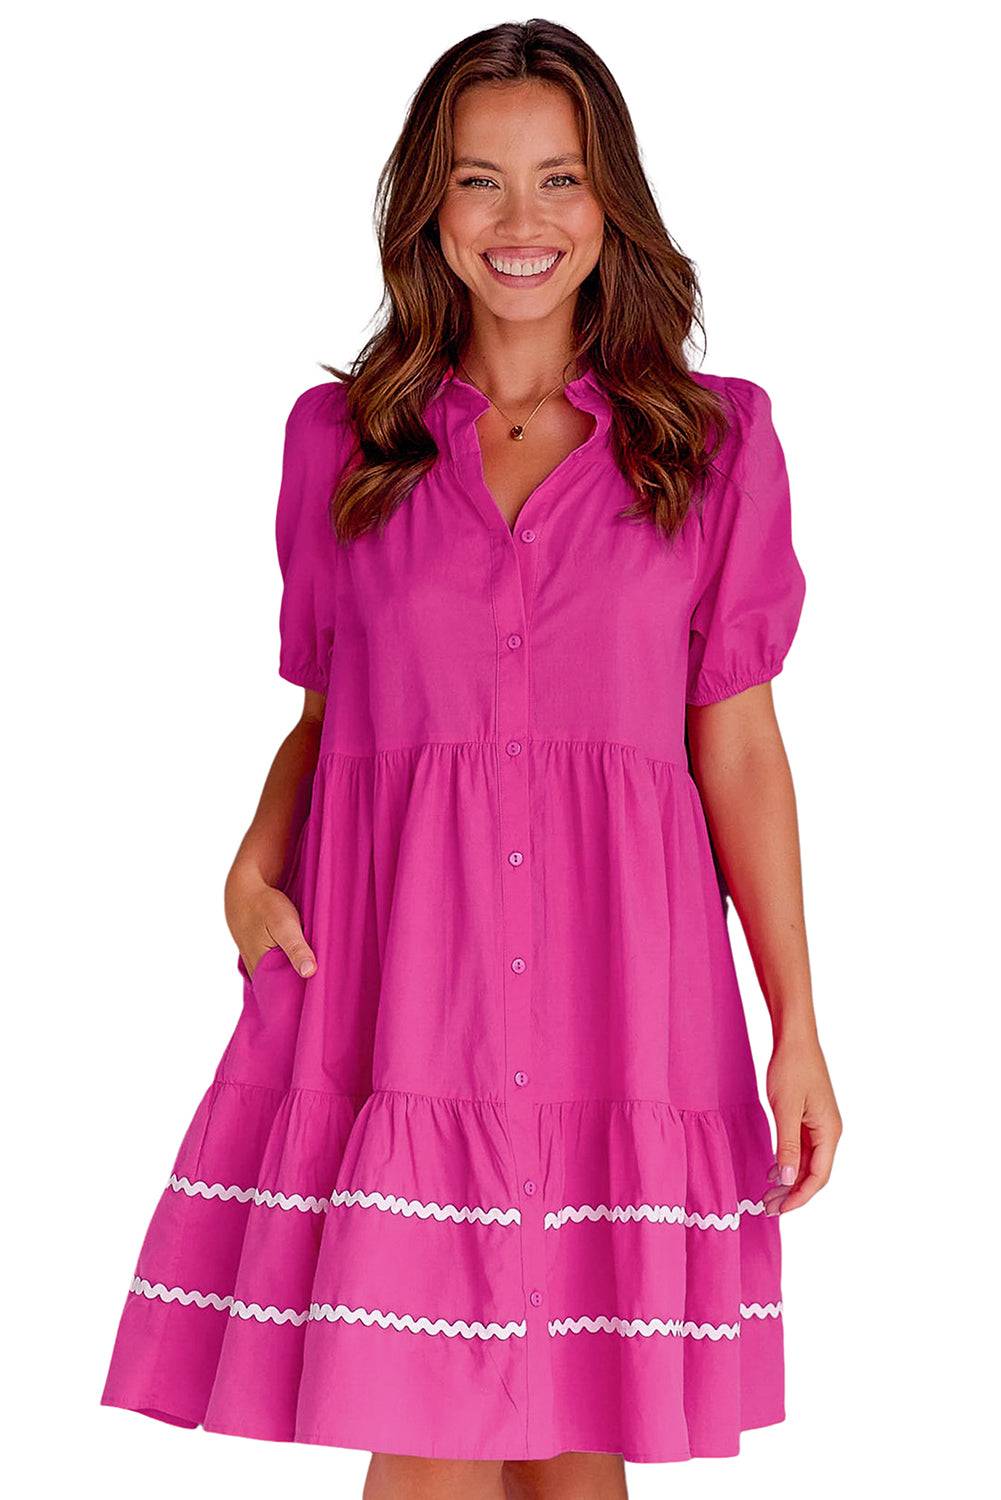 a woman in a pink dress smiling at the camera